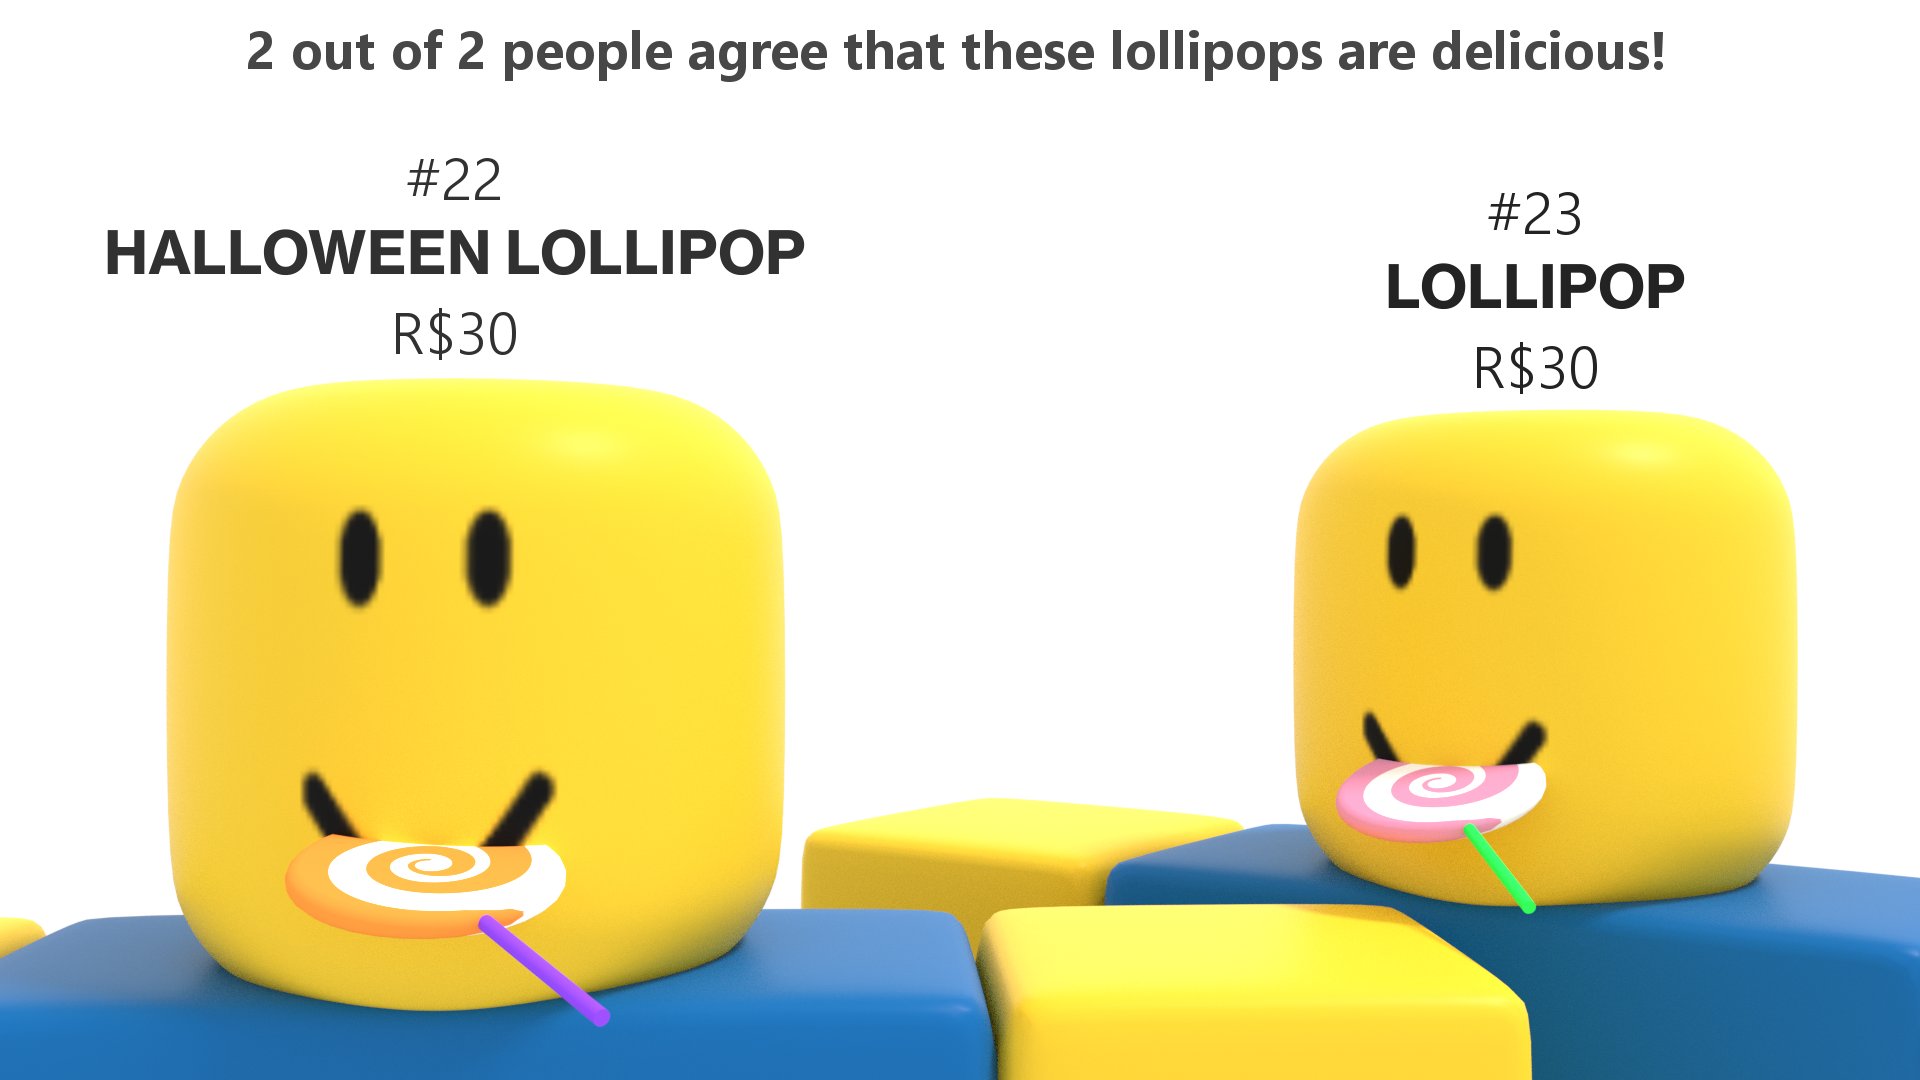 Maplestick On Twitter Treat Yourself To Some Of Maplestick S Officially Licensed Lollipops They Re The Best In The Business And Research Shows Https T Co 3vwdqq90f6 Https T Co Cktjt66toh Https T Co 6xvqbcma9z - lollipop roblox id